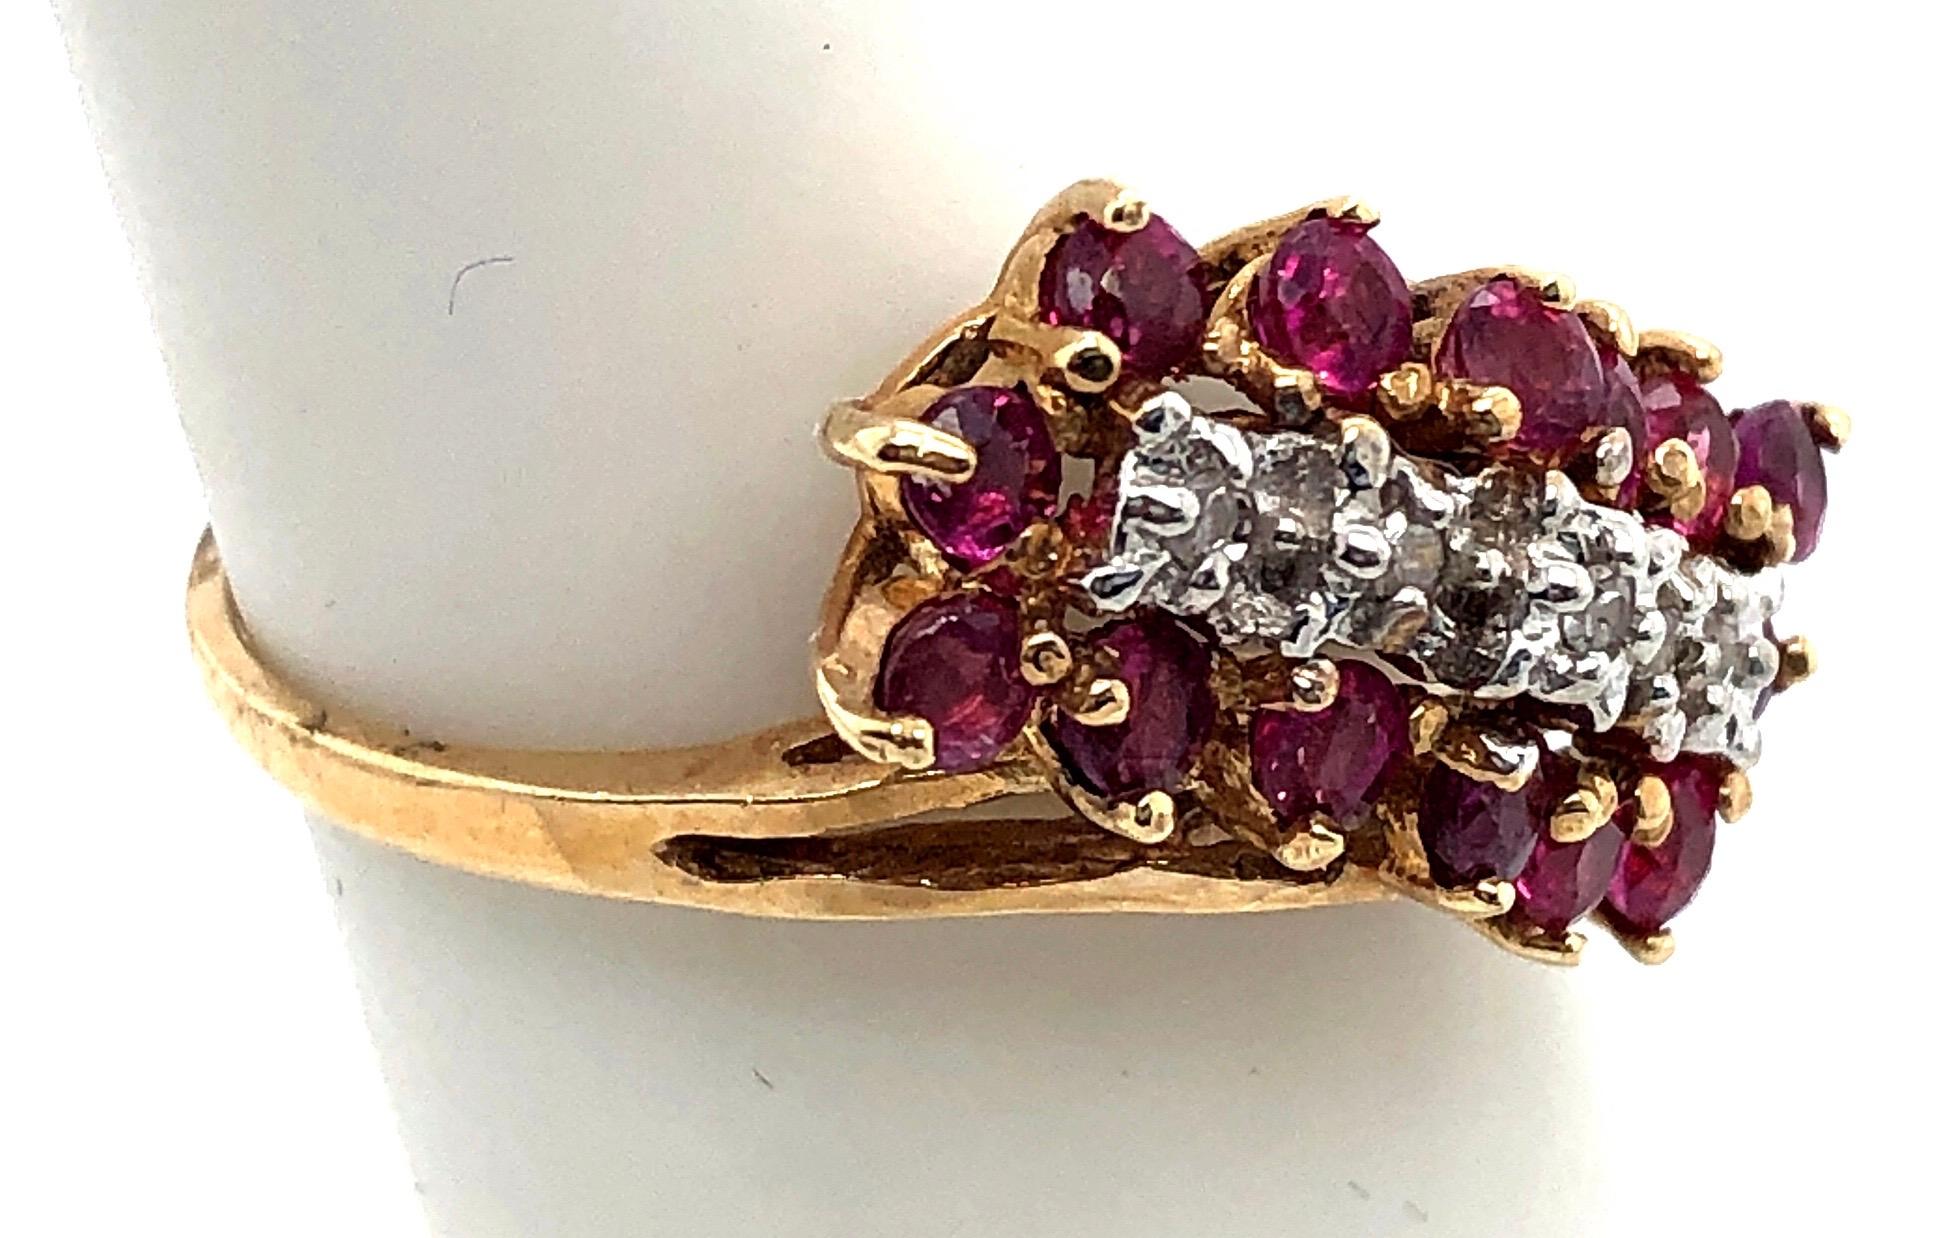 14 Karat Yellow Gold Ruby and Diamond Cluster Ring Size 5
The diamonds are set on white gold.
0.25 total diamond weight.
14 piece round rubies
3.13 grams total weight.
